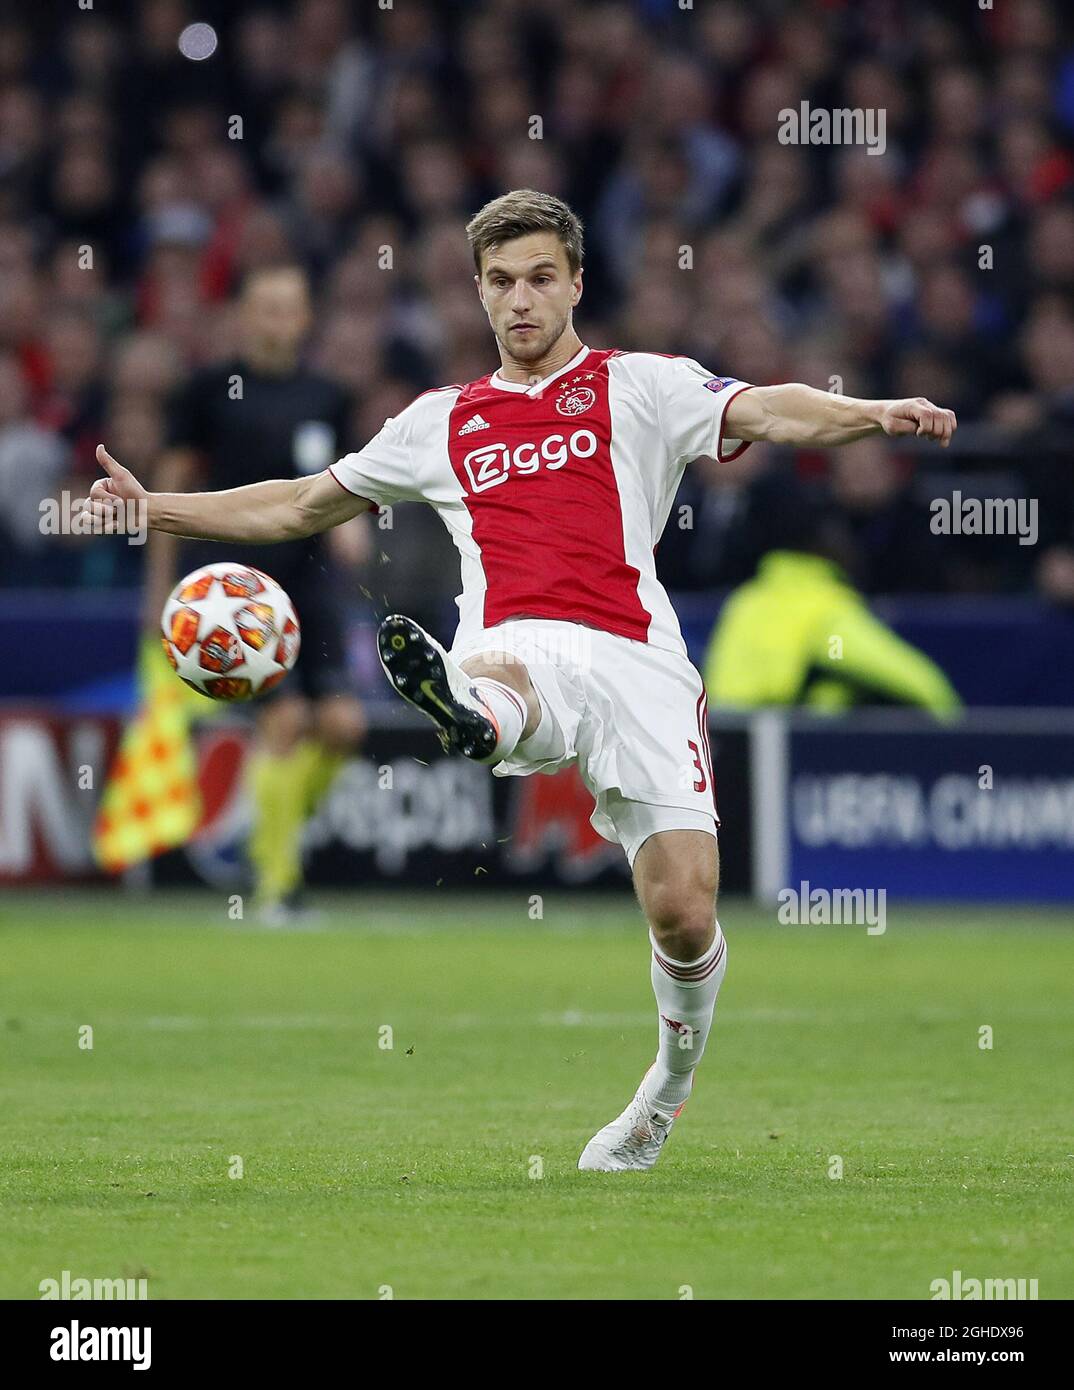 Ajax's Joel Veltman during the UEFA Champions League match at the Johan Cruyff Arena, Amsterdam. Picture date: 8th May 2019. Picture credit should read: David Klein/Sportimage via PA Images Stock Photo